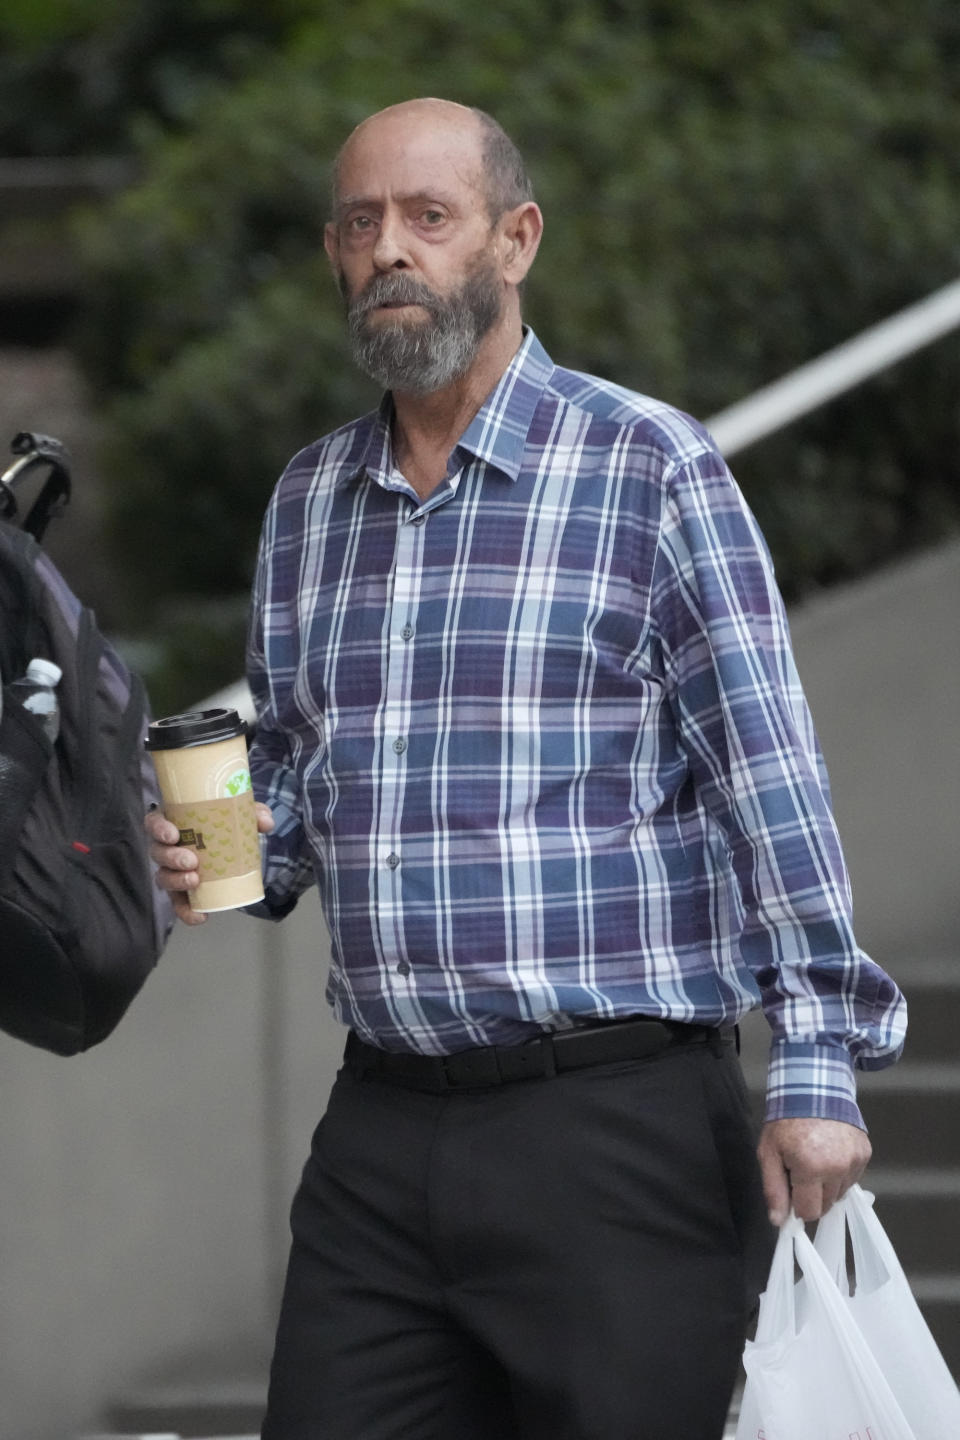 FILE - Defendant Jerry Boylan, captain of the Conception, right, arrives to federal court in Los Angeles, Wednesday, Oct. 25, 2023. A federal jury on Monday, Nov. 6, found the scuba dive boat captain was criminally negligent in the deaths of 34 people killed in a fire aboard the vessel in 2019, the deadliest maritime disaster in recent U.S. history. (AP Photo/Damian Dovarganes, File)